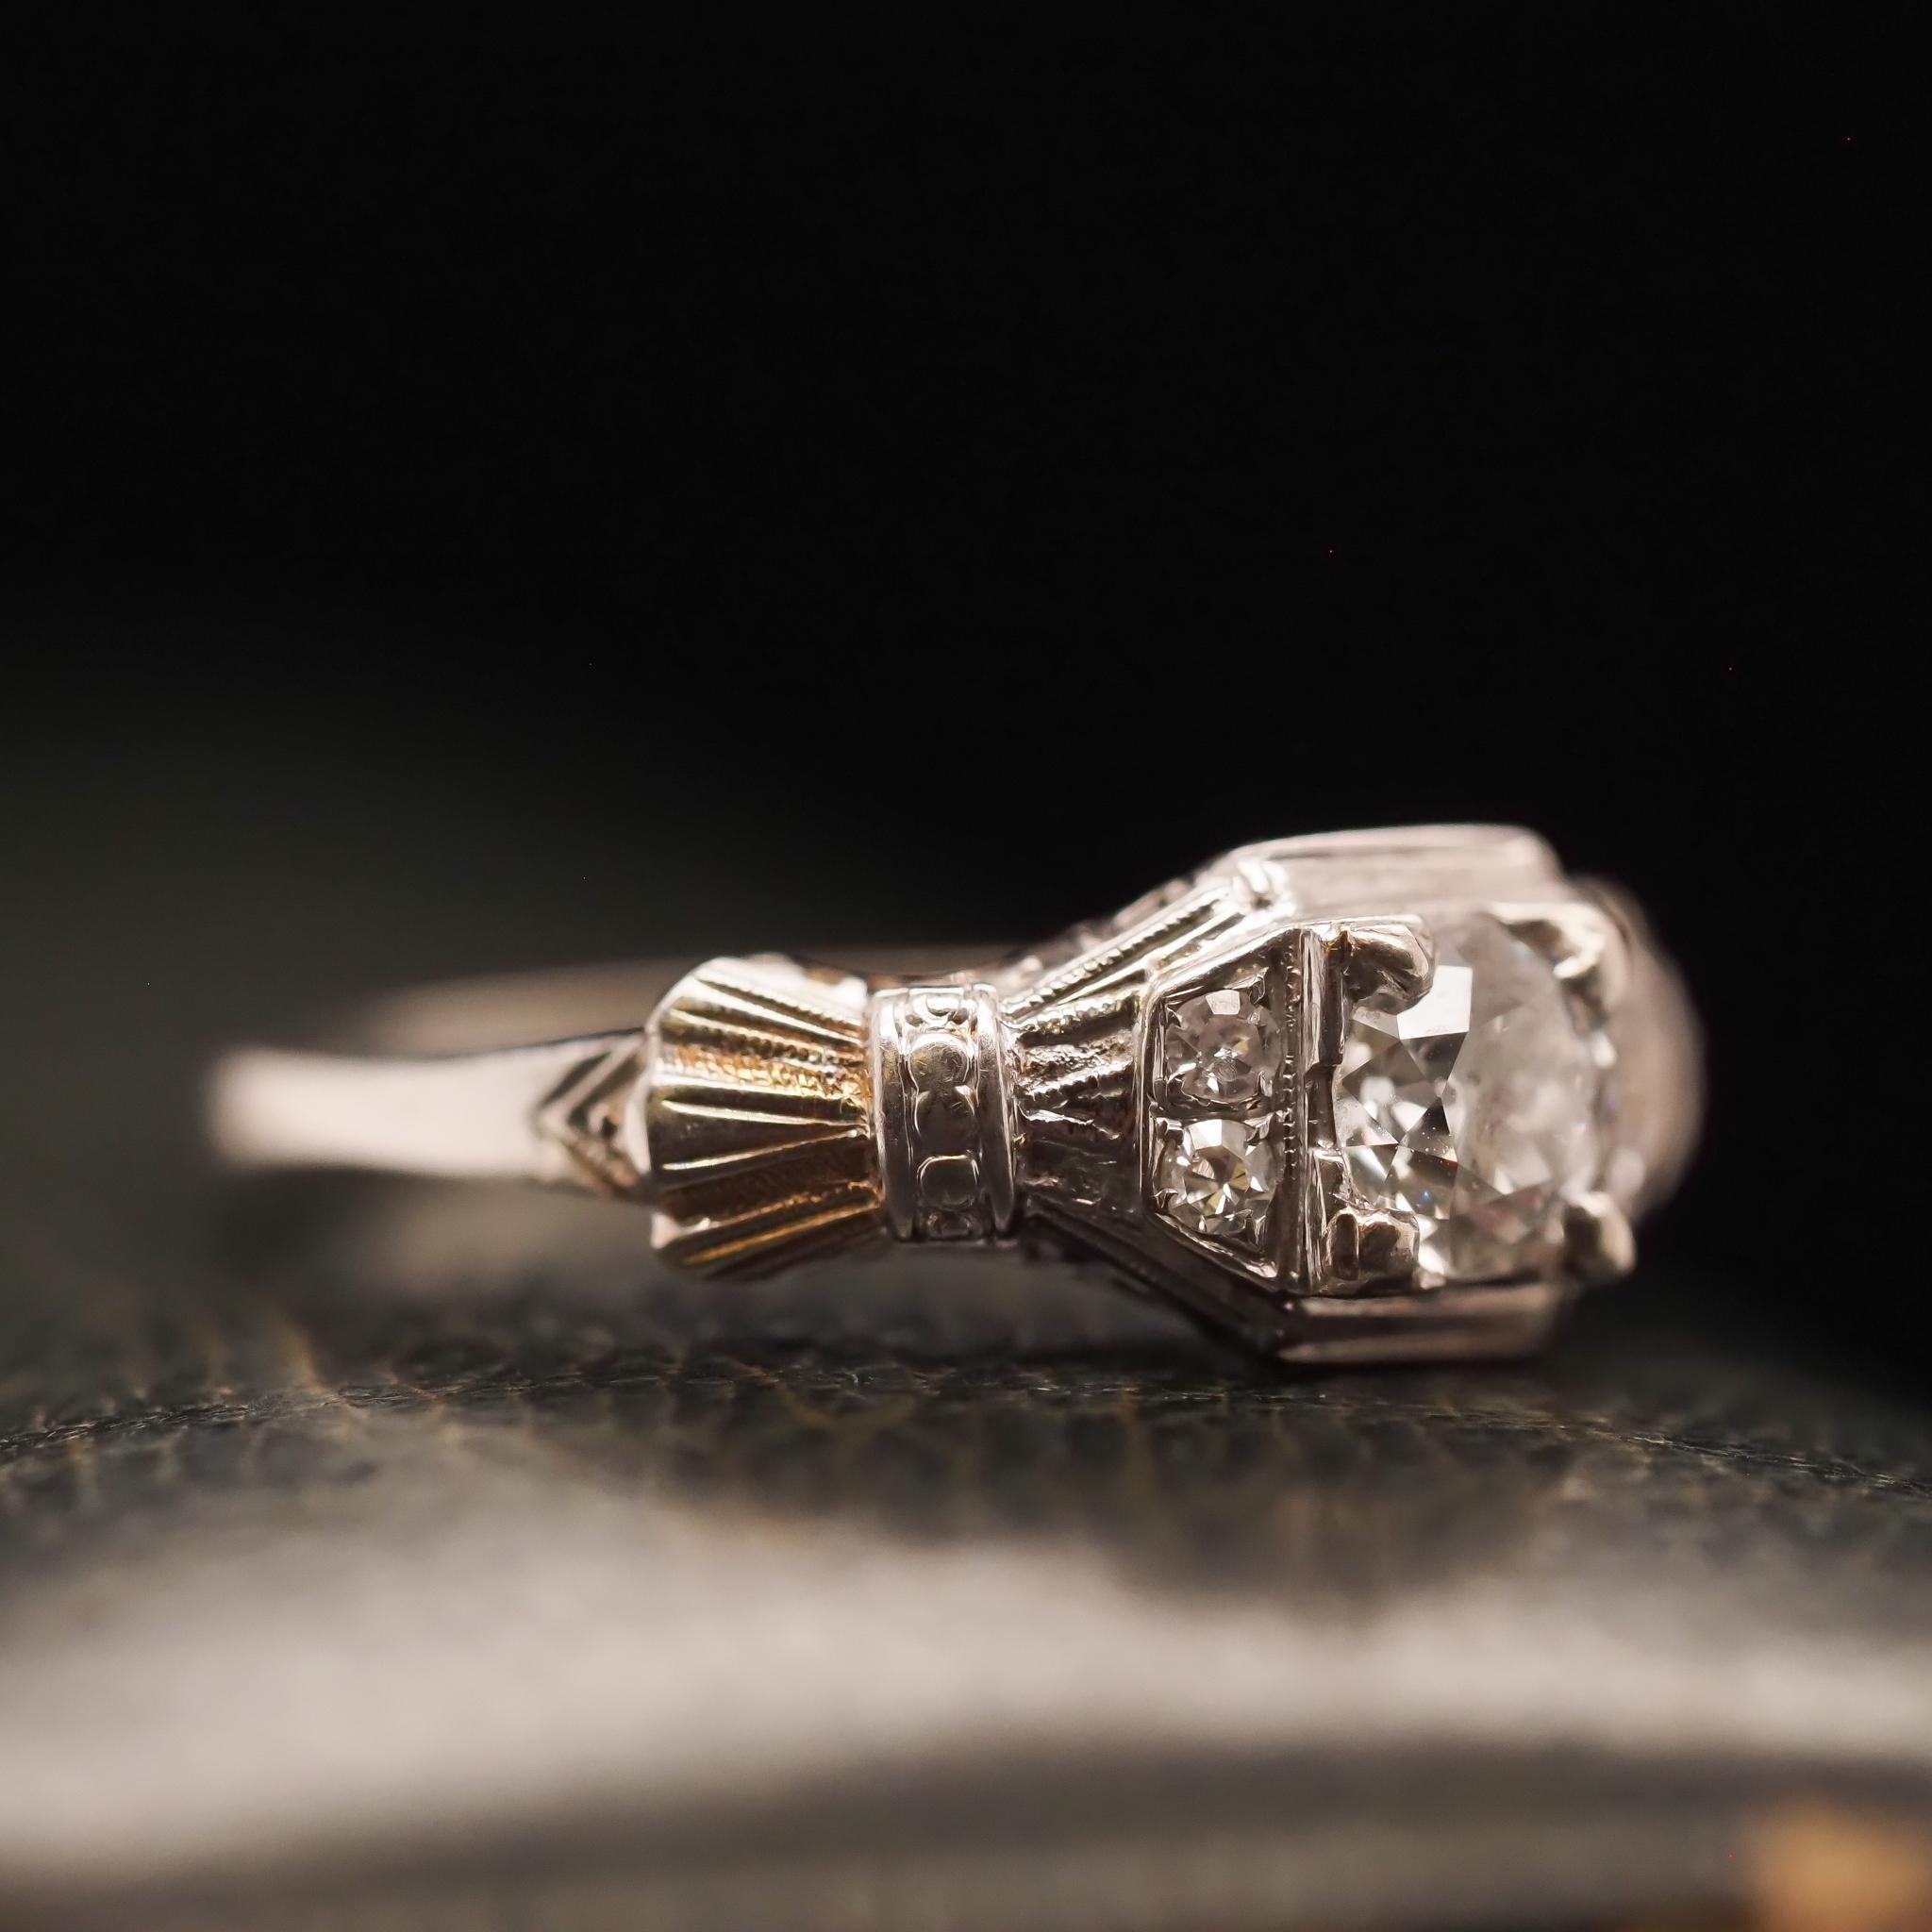 Item Details:
Ring Size: 7 (Sizable)
Metal Type: 14K White Gold [Hallmarked, and Tested]
Weight: 2.8 grams
Diamond Details: .50ct, Old European Brilliant, H color, VS Clarity.
Band Width: 1.70 mm
Condition: Excellent
Art Deco